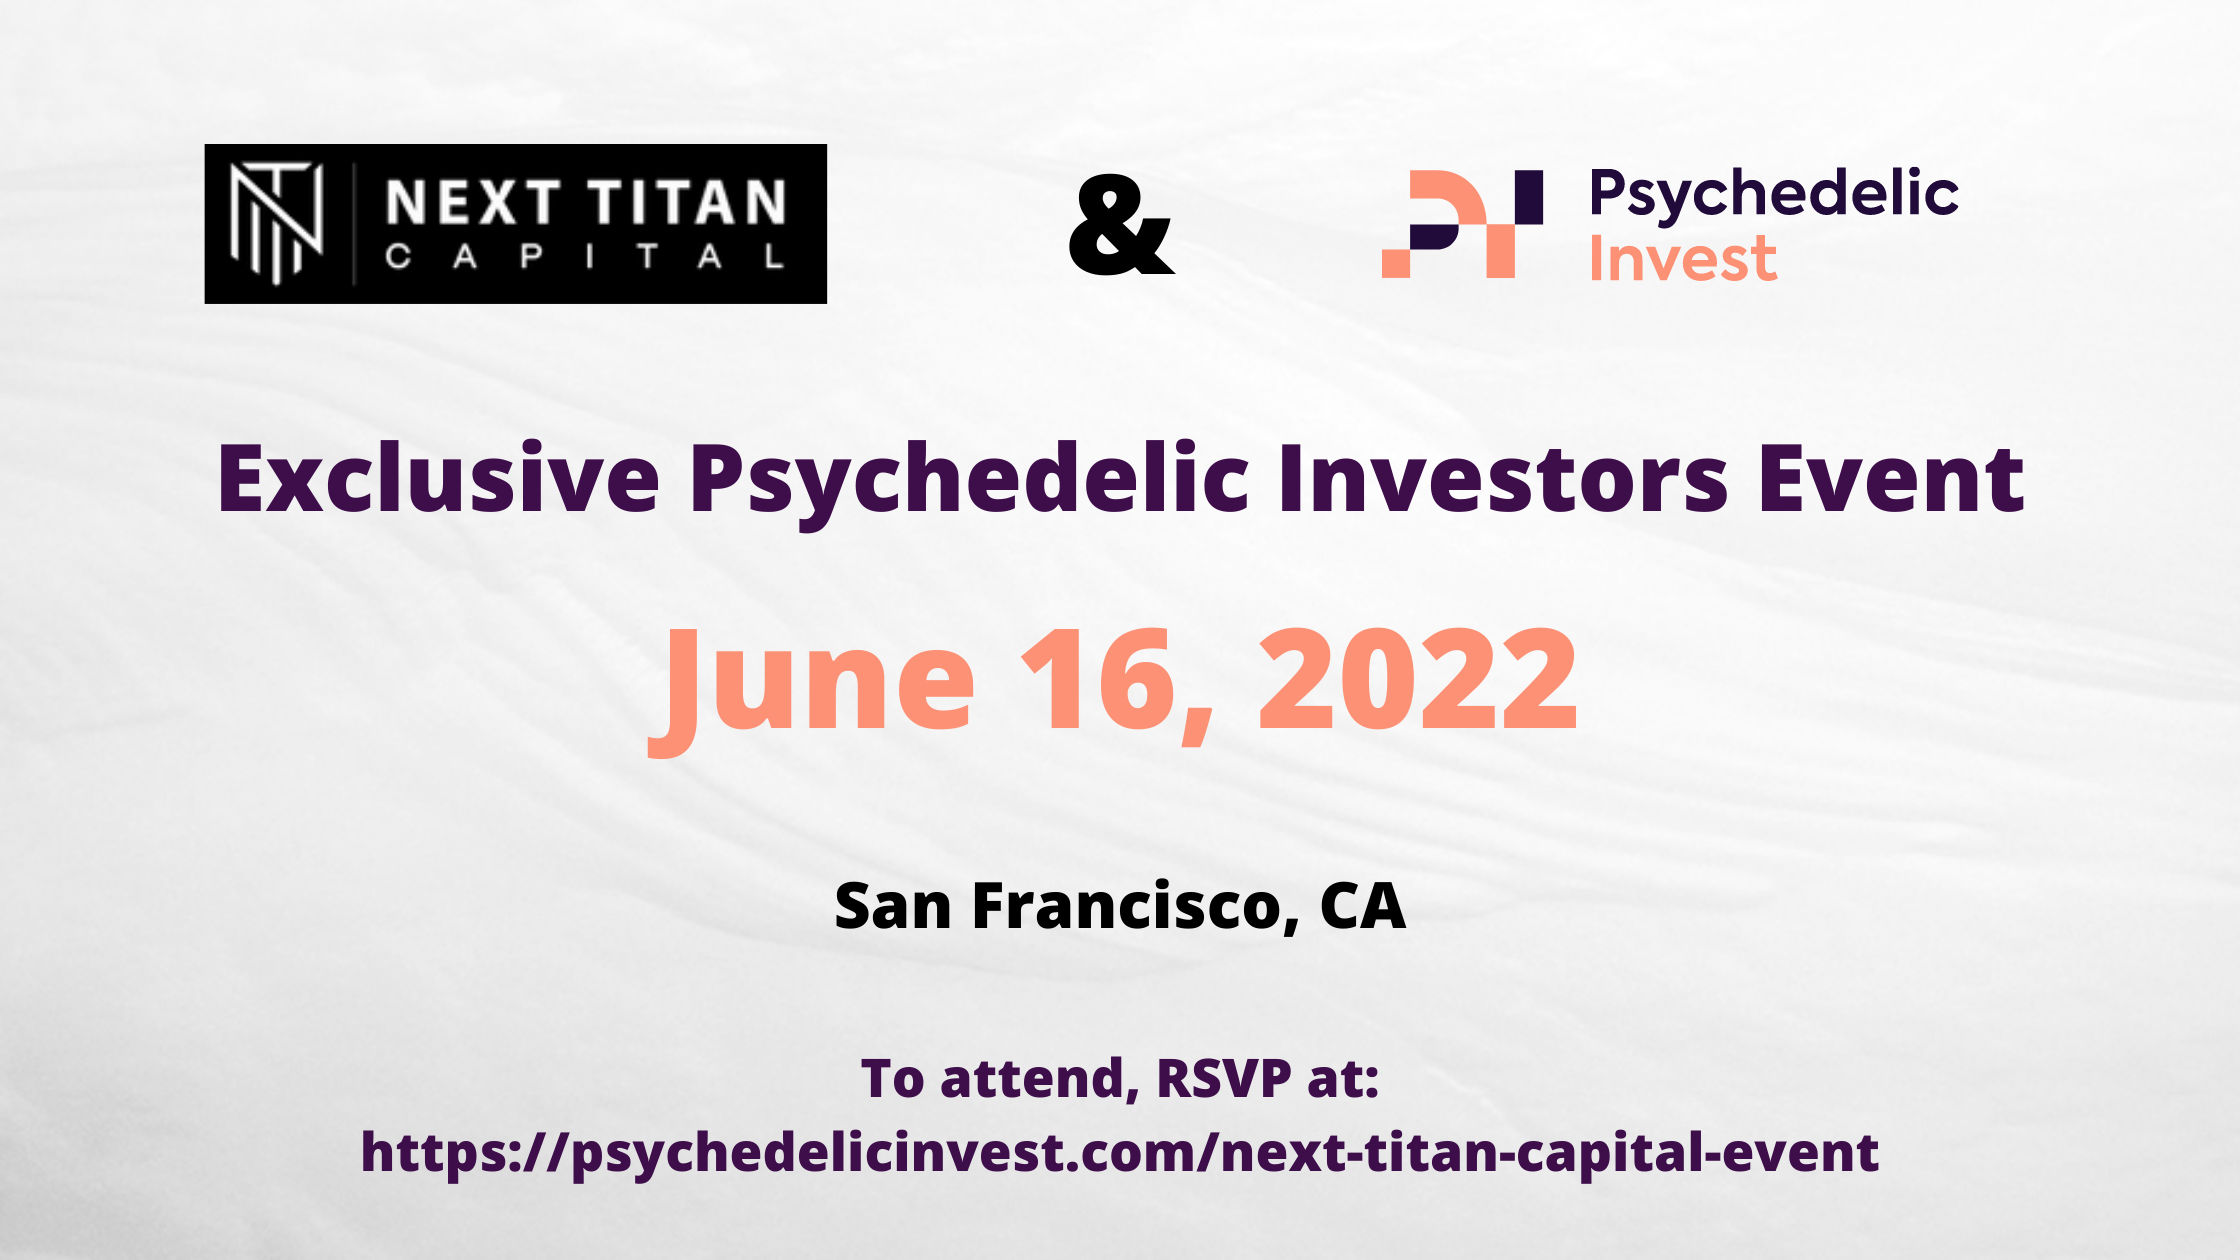 Next Titan Capital and Psychedelic Invest: Exclusive Investor Event